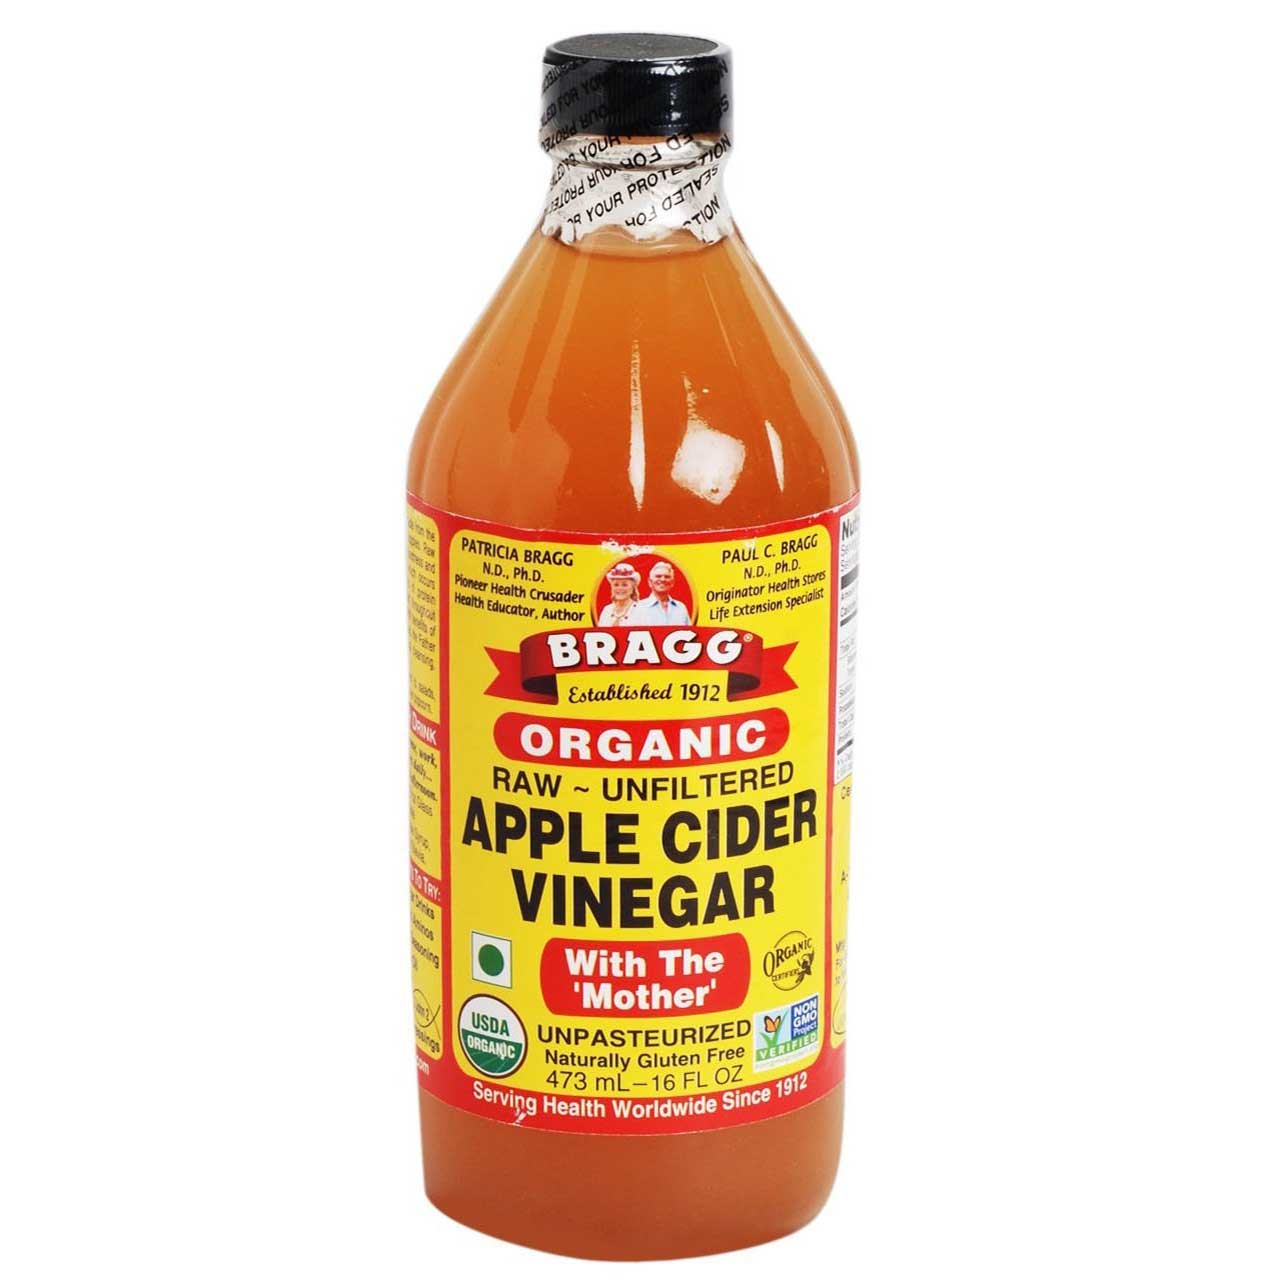 Bragg Organic Raw Unfiltered Apple Cider Vinegar “With the Mother” – Natural  Hair Avenue